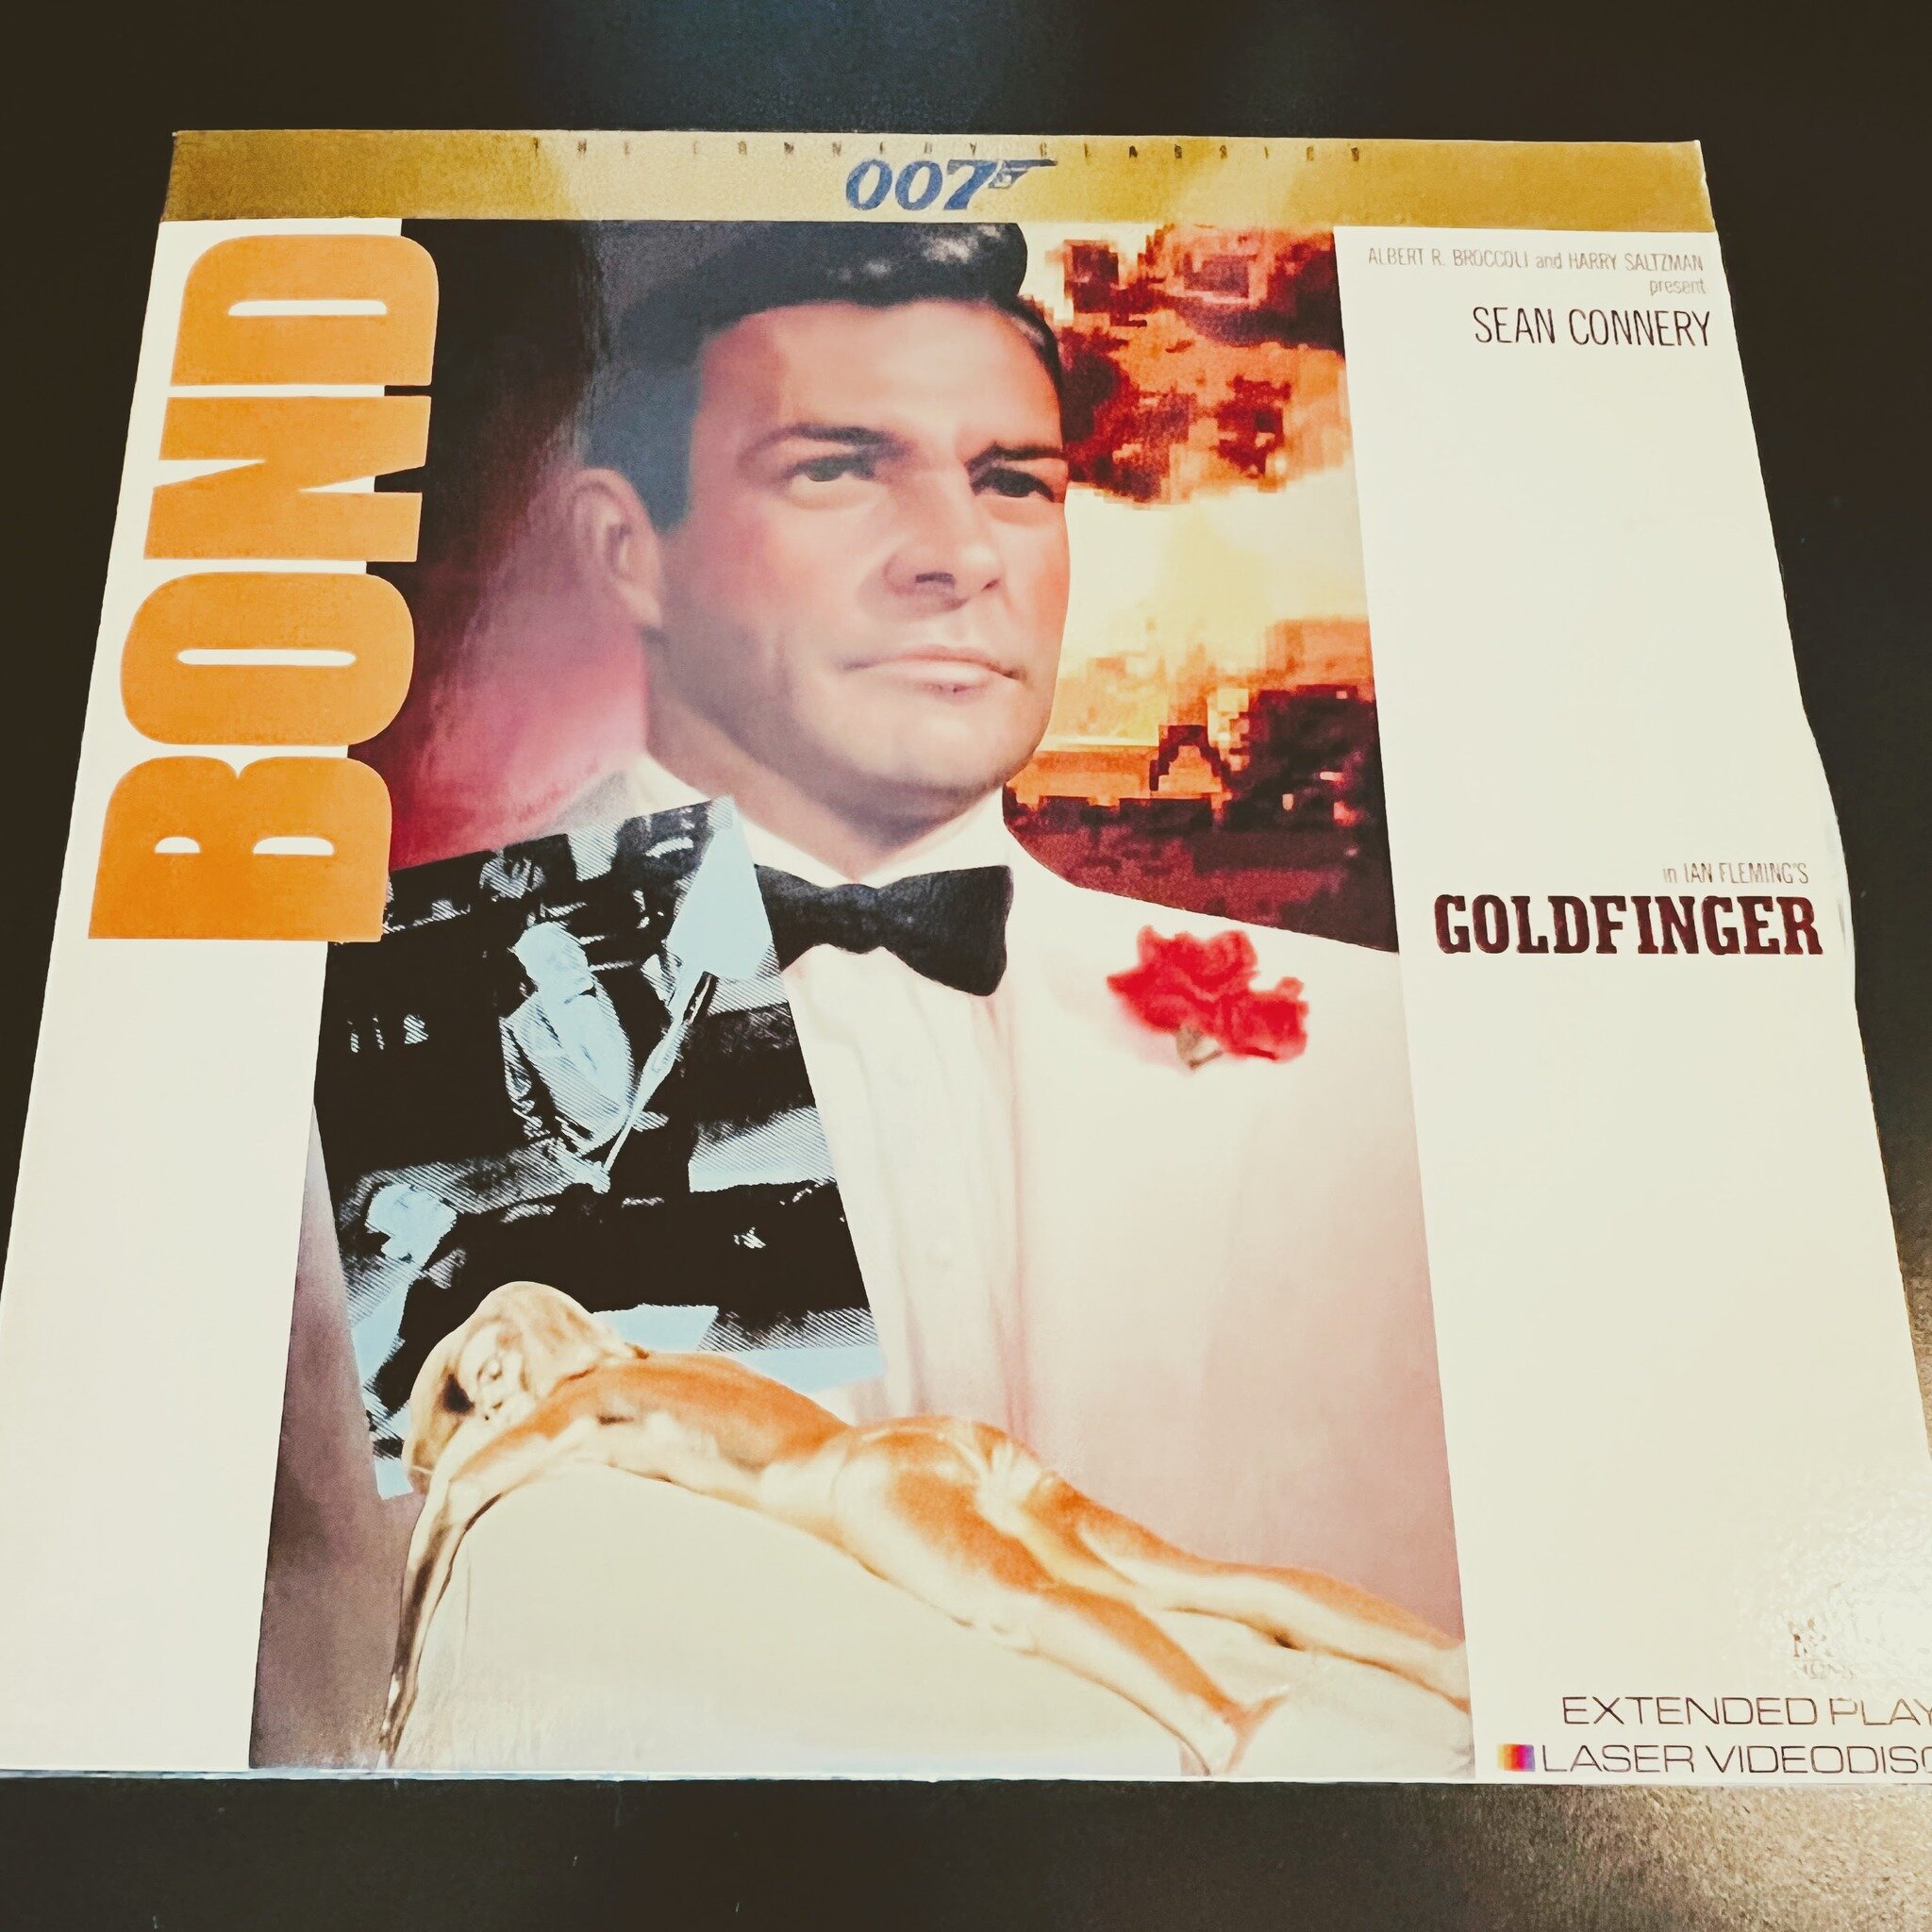 &quot;Do you expect me to talk?&quot; We have an impressive vinyl record collection at this weekend&rsquo;s #CoralGables #EstateSale including some classic movie soundtracks! http://go.1or.ch